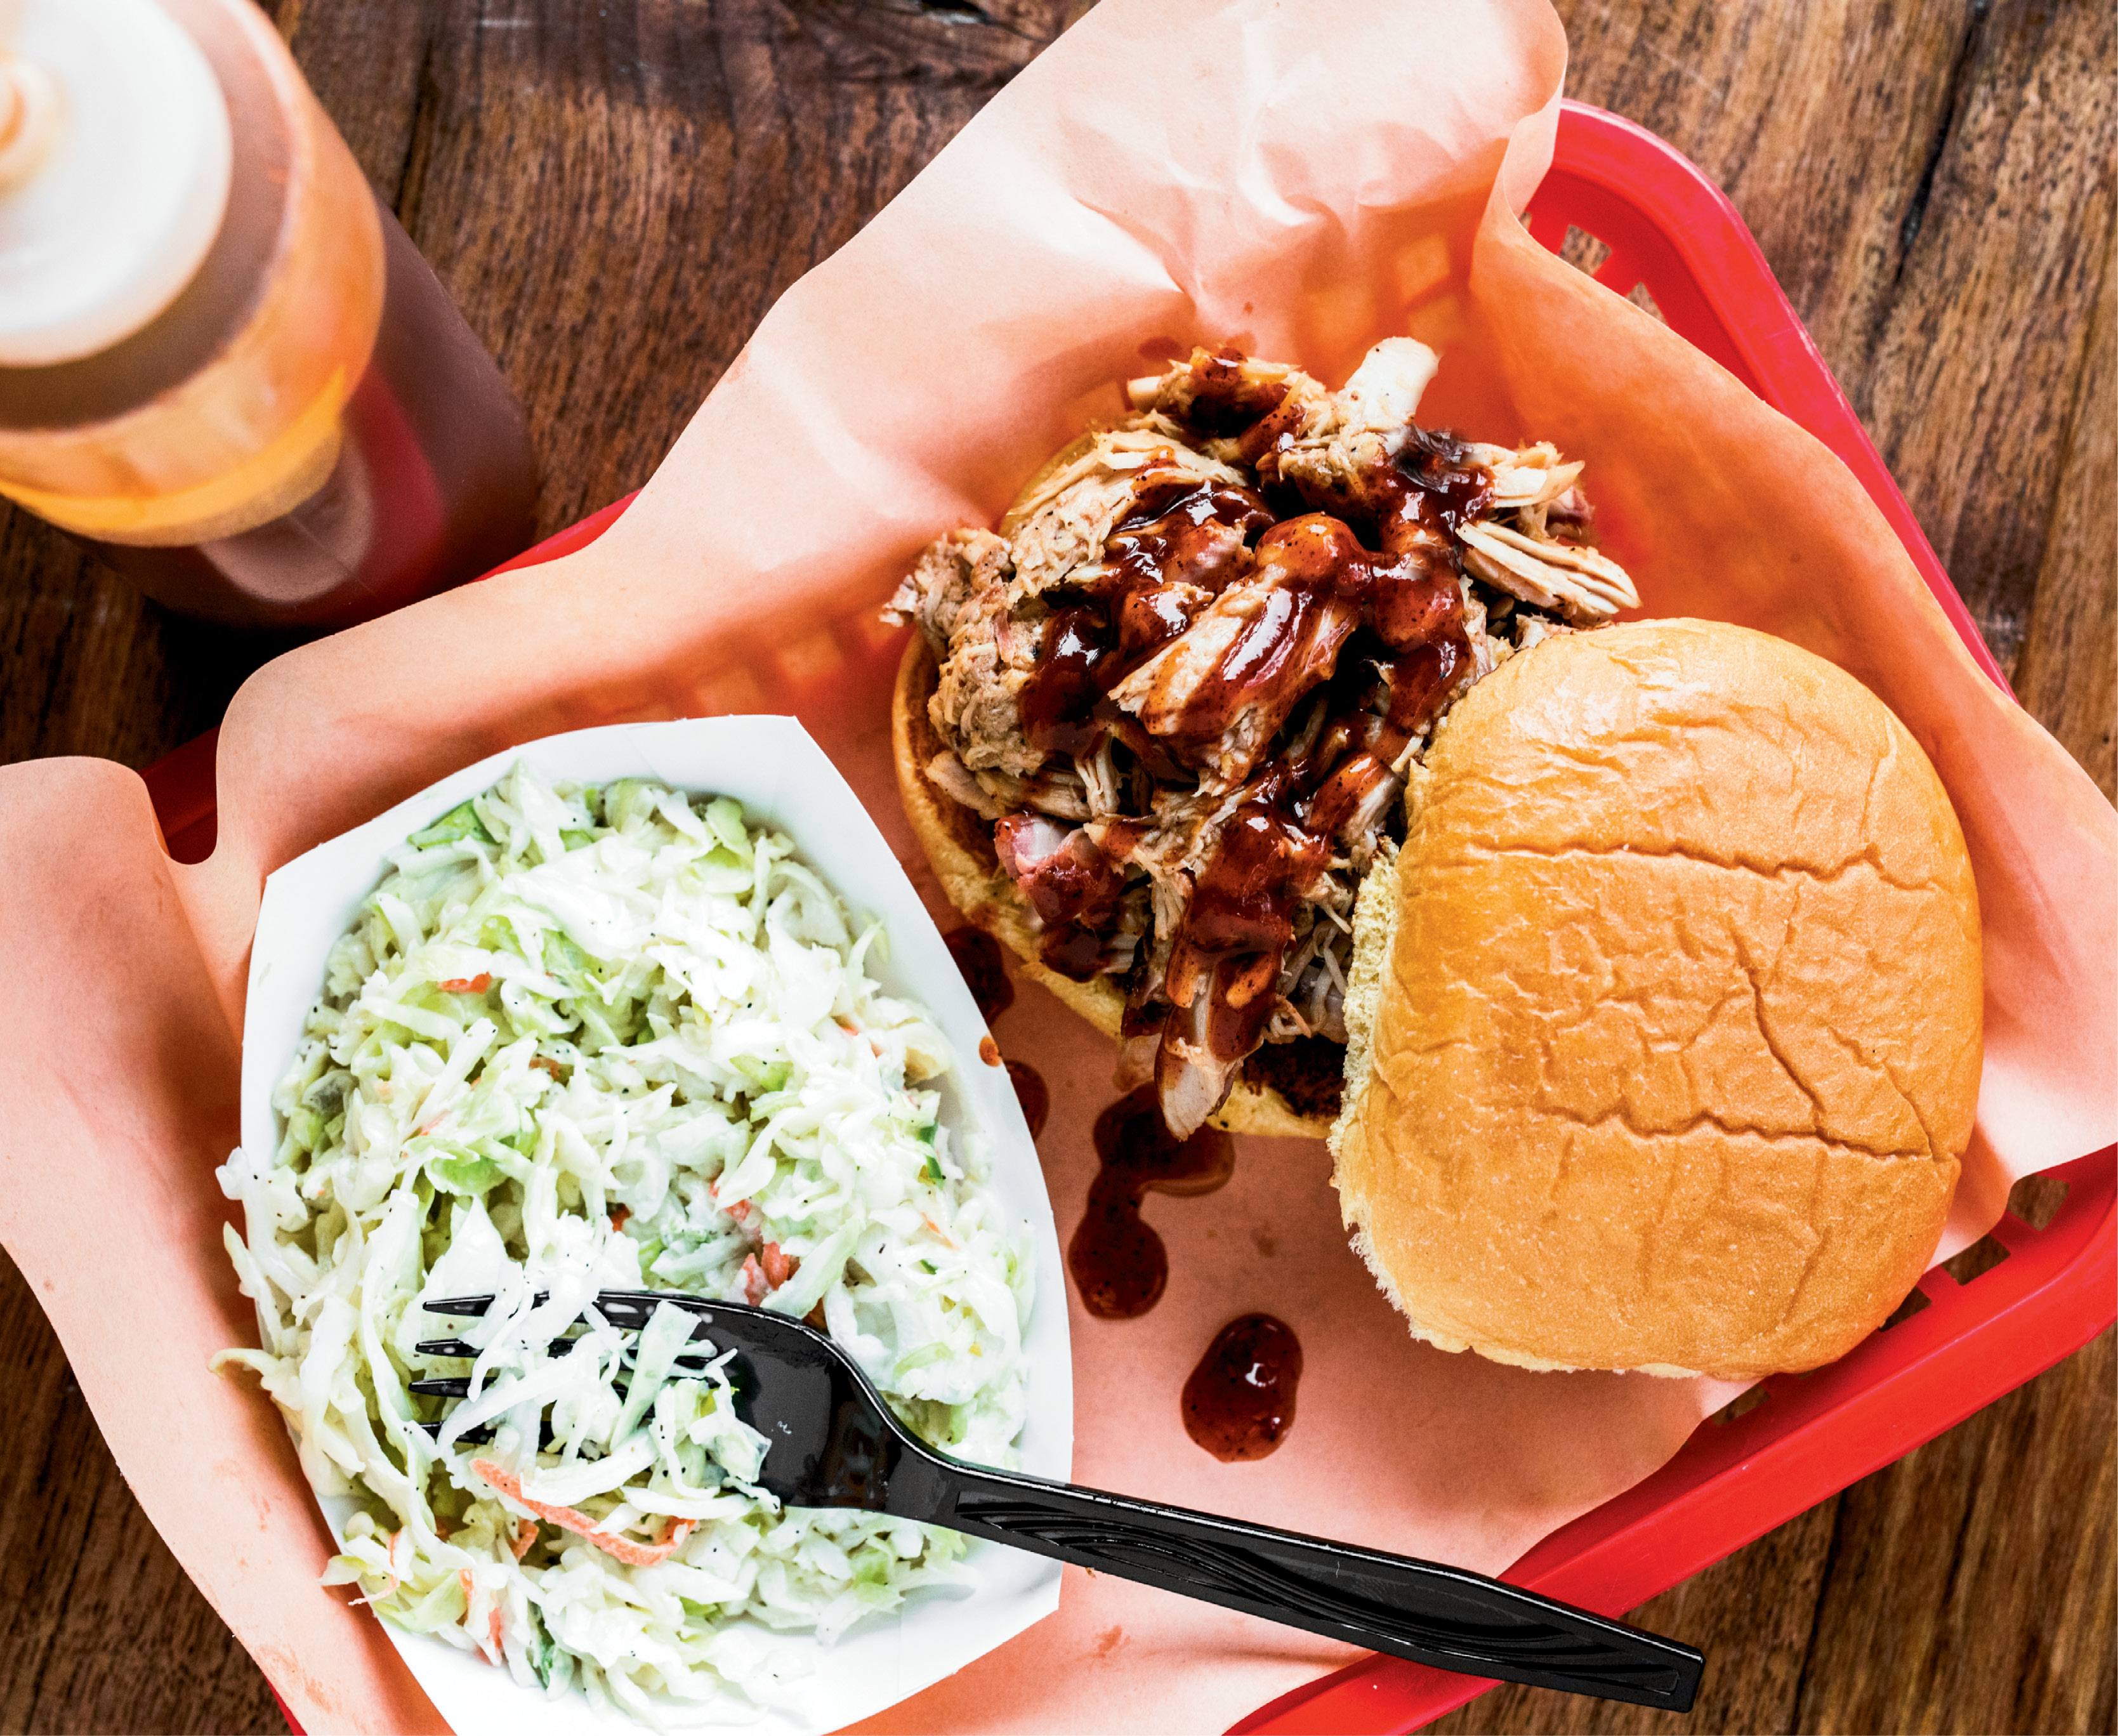 Rodney Scott has a line out the door at his new pithouse, serving up saucy pulled pork sandwiches, creamy coleslaw, and more